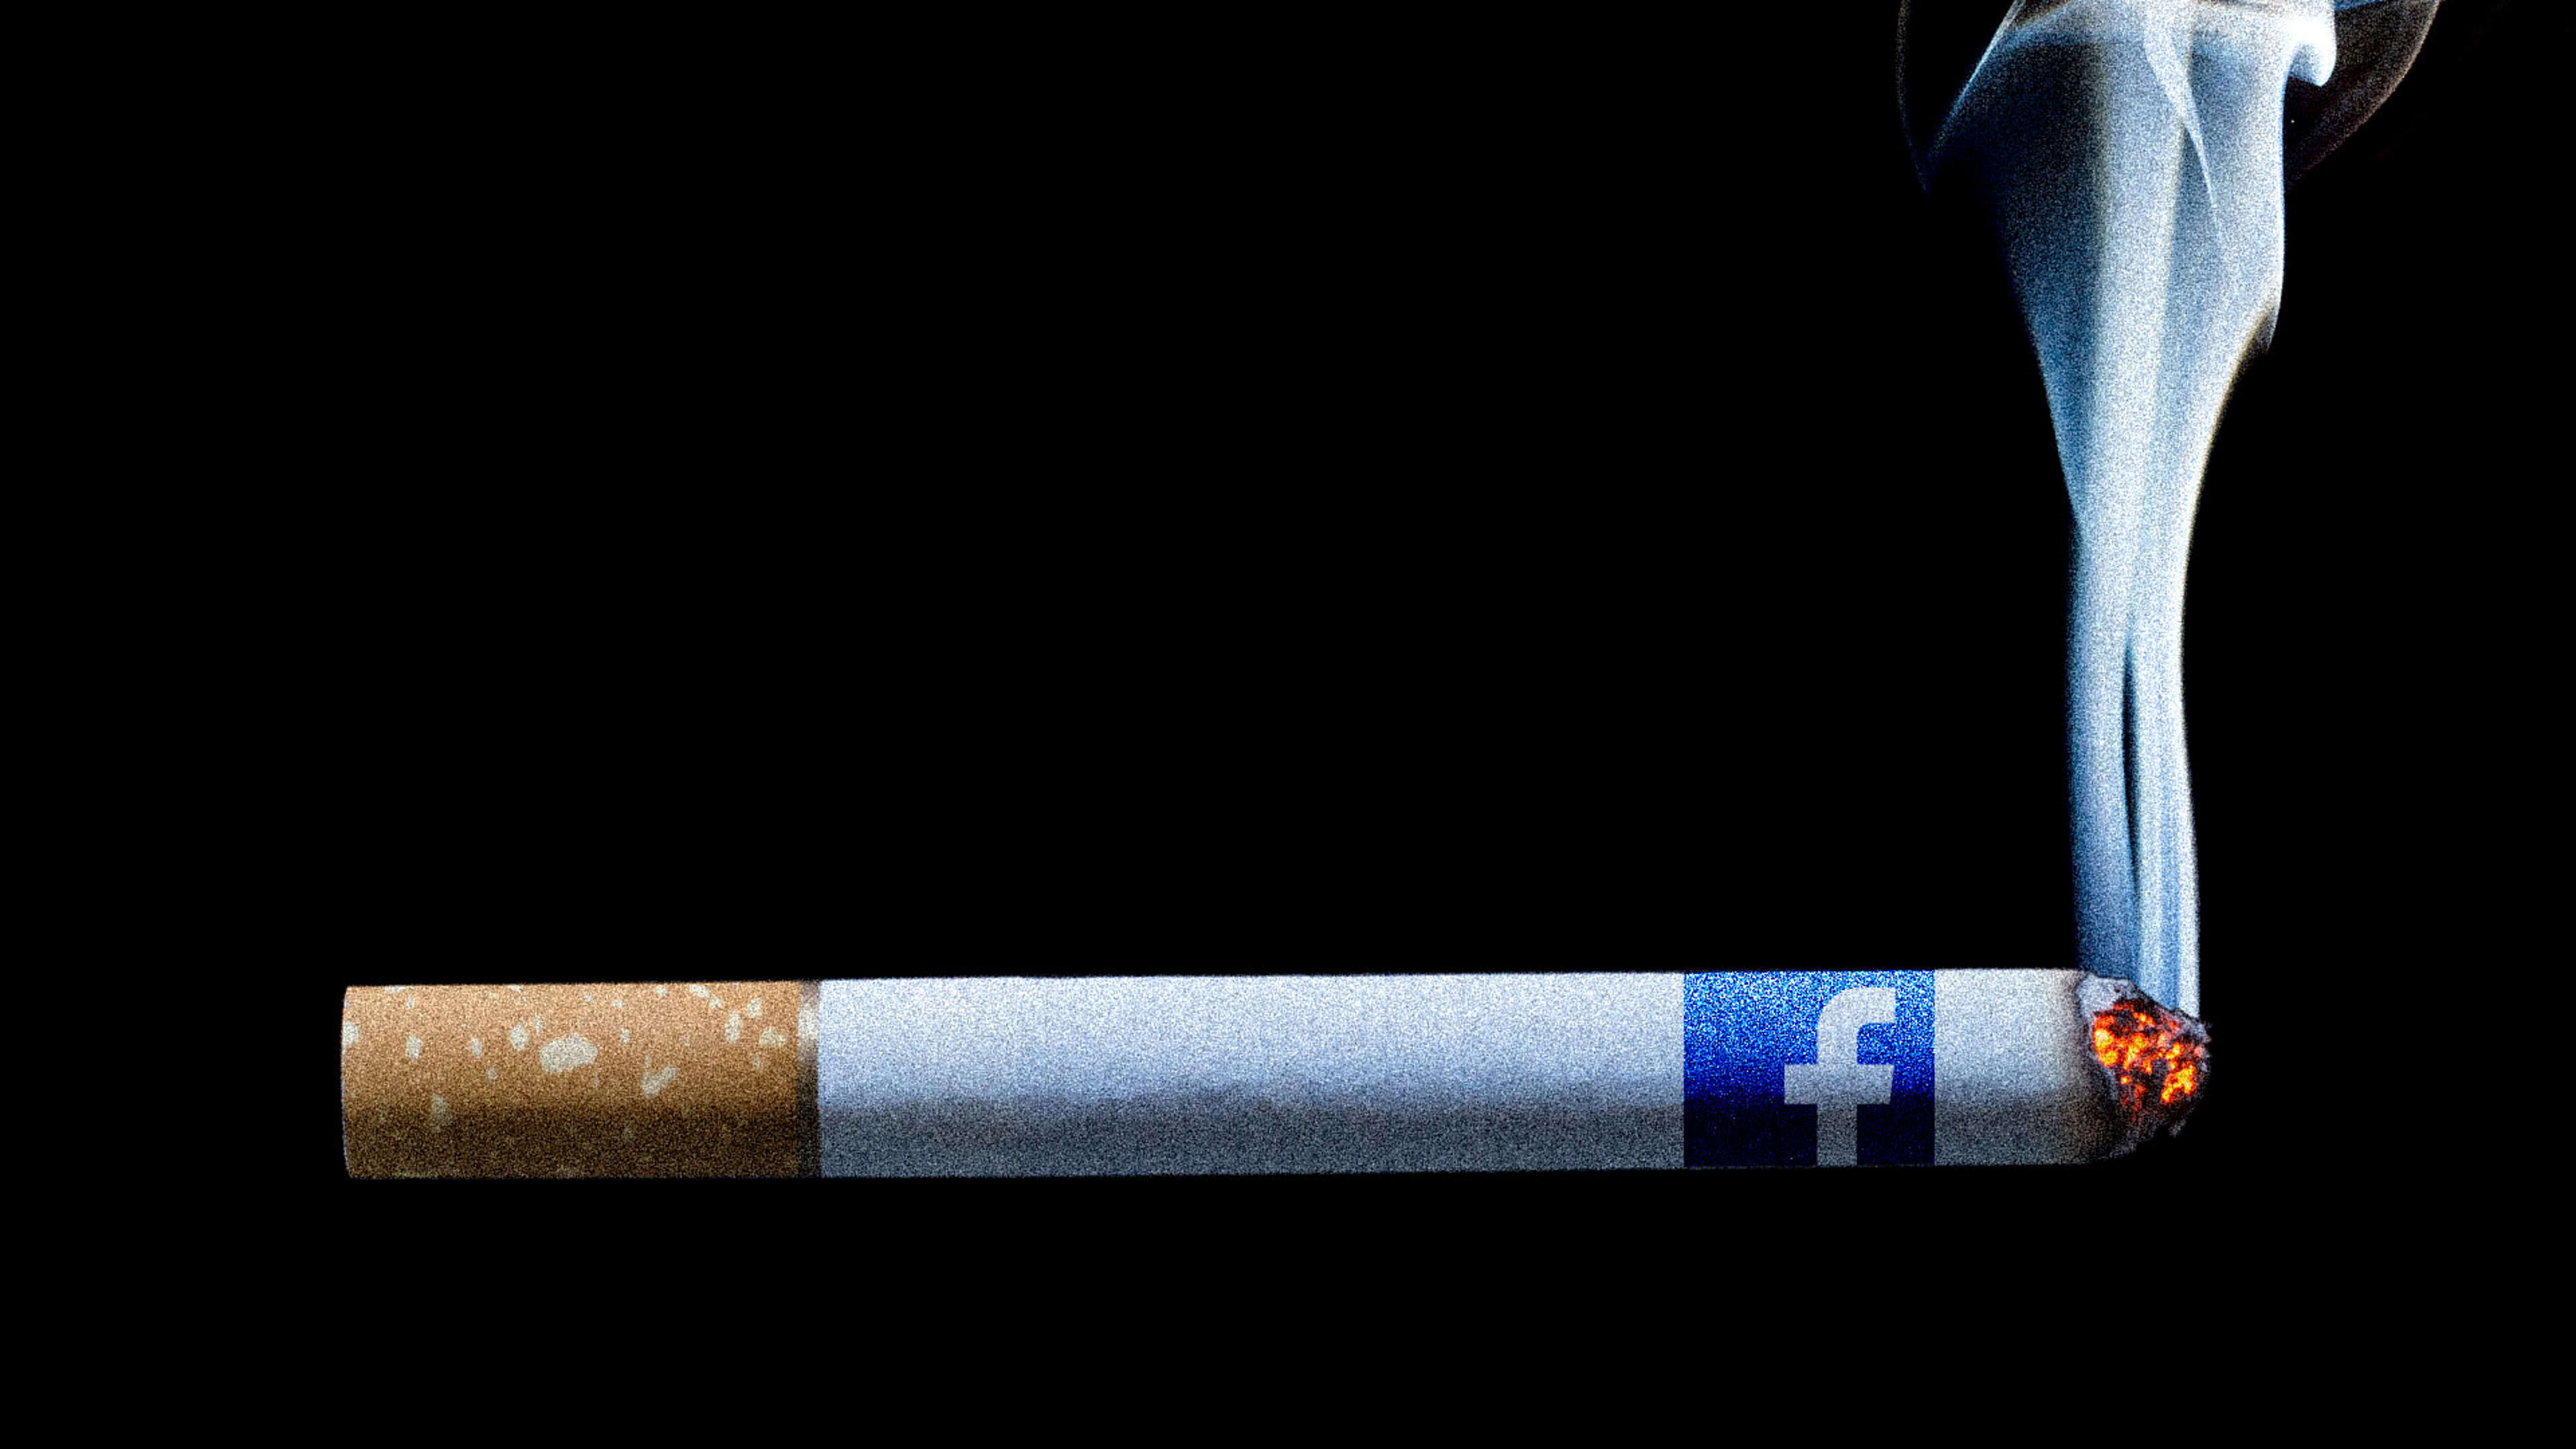 Facebook’s reported name change reinforces its image as the new Big Tobacco